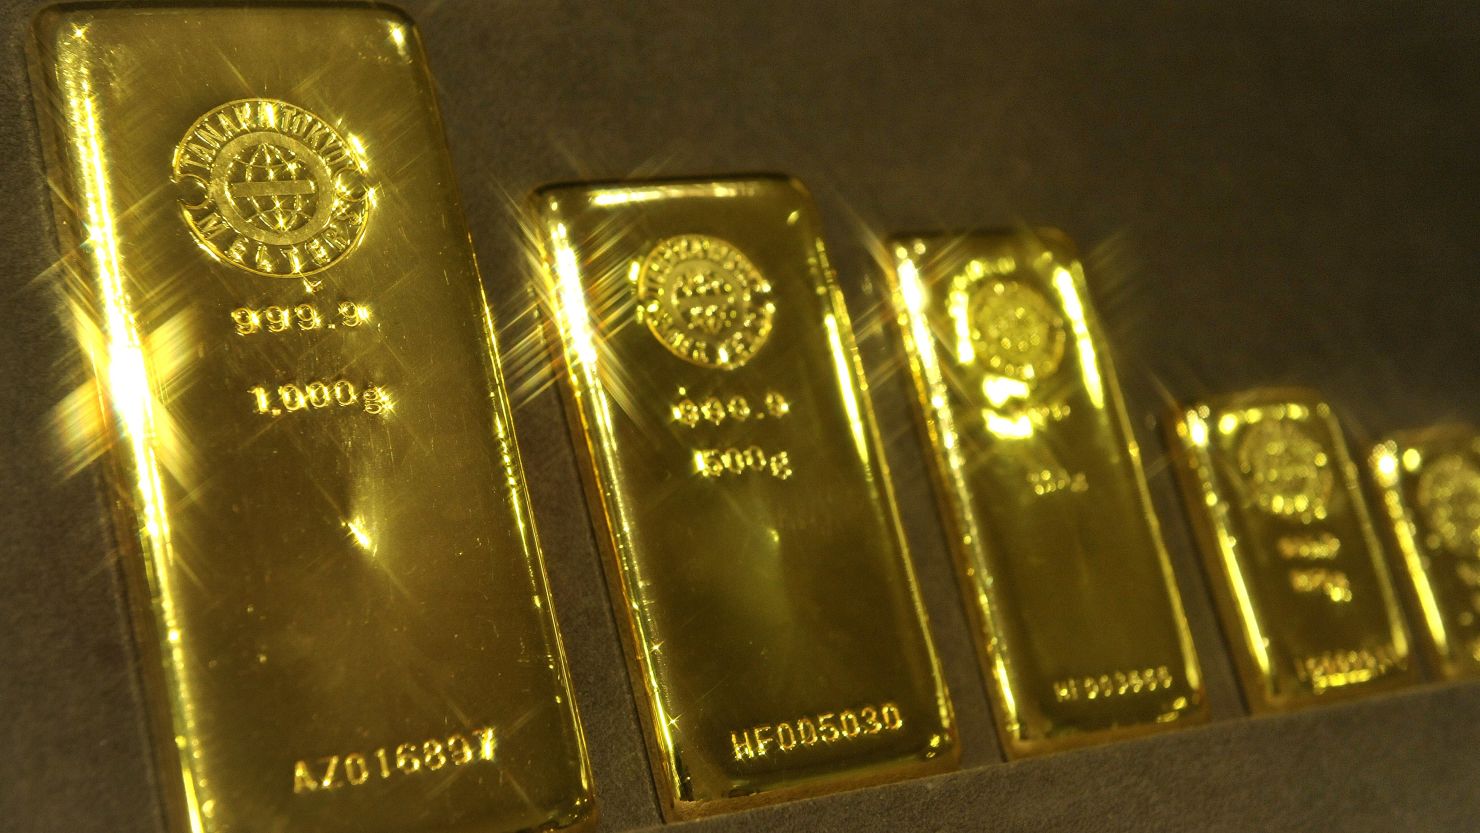 Cyprus is selling some of its gold reserves.